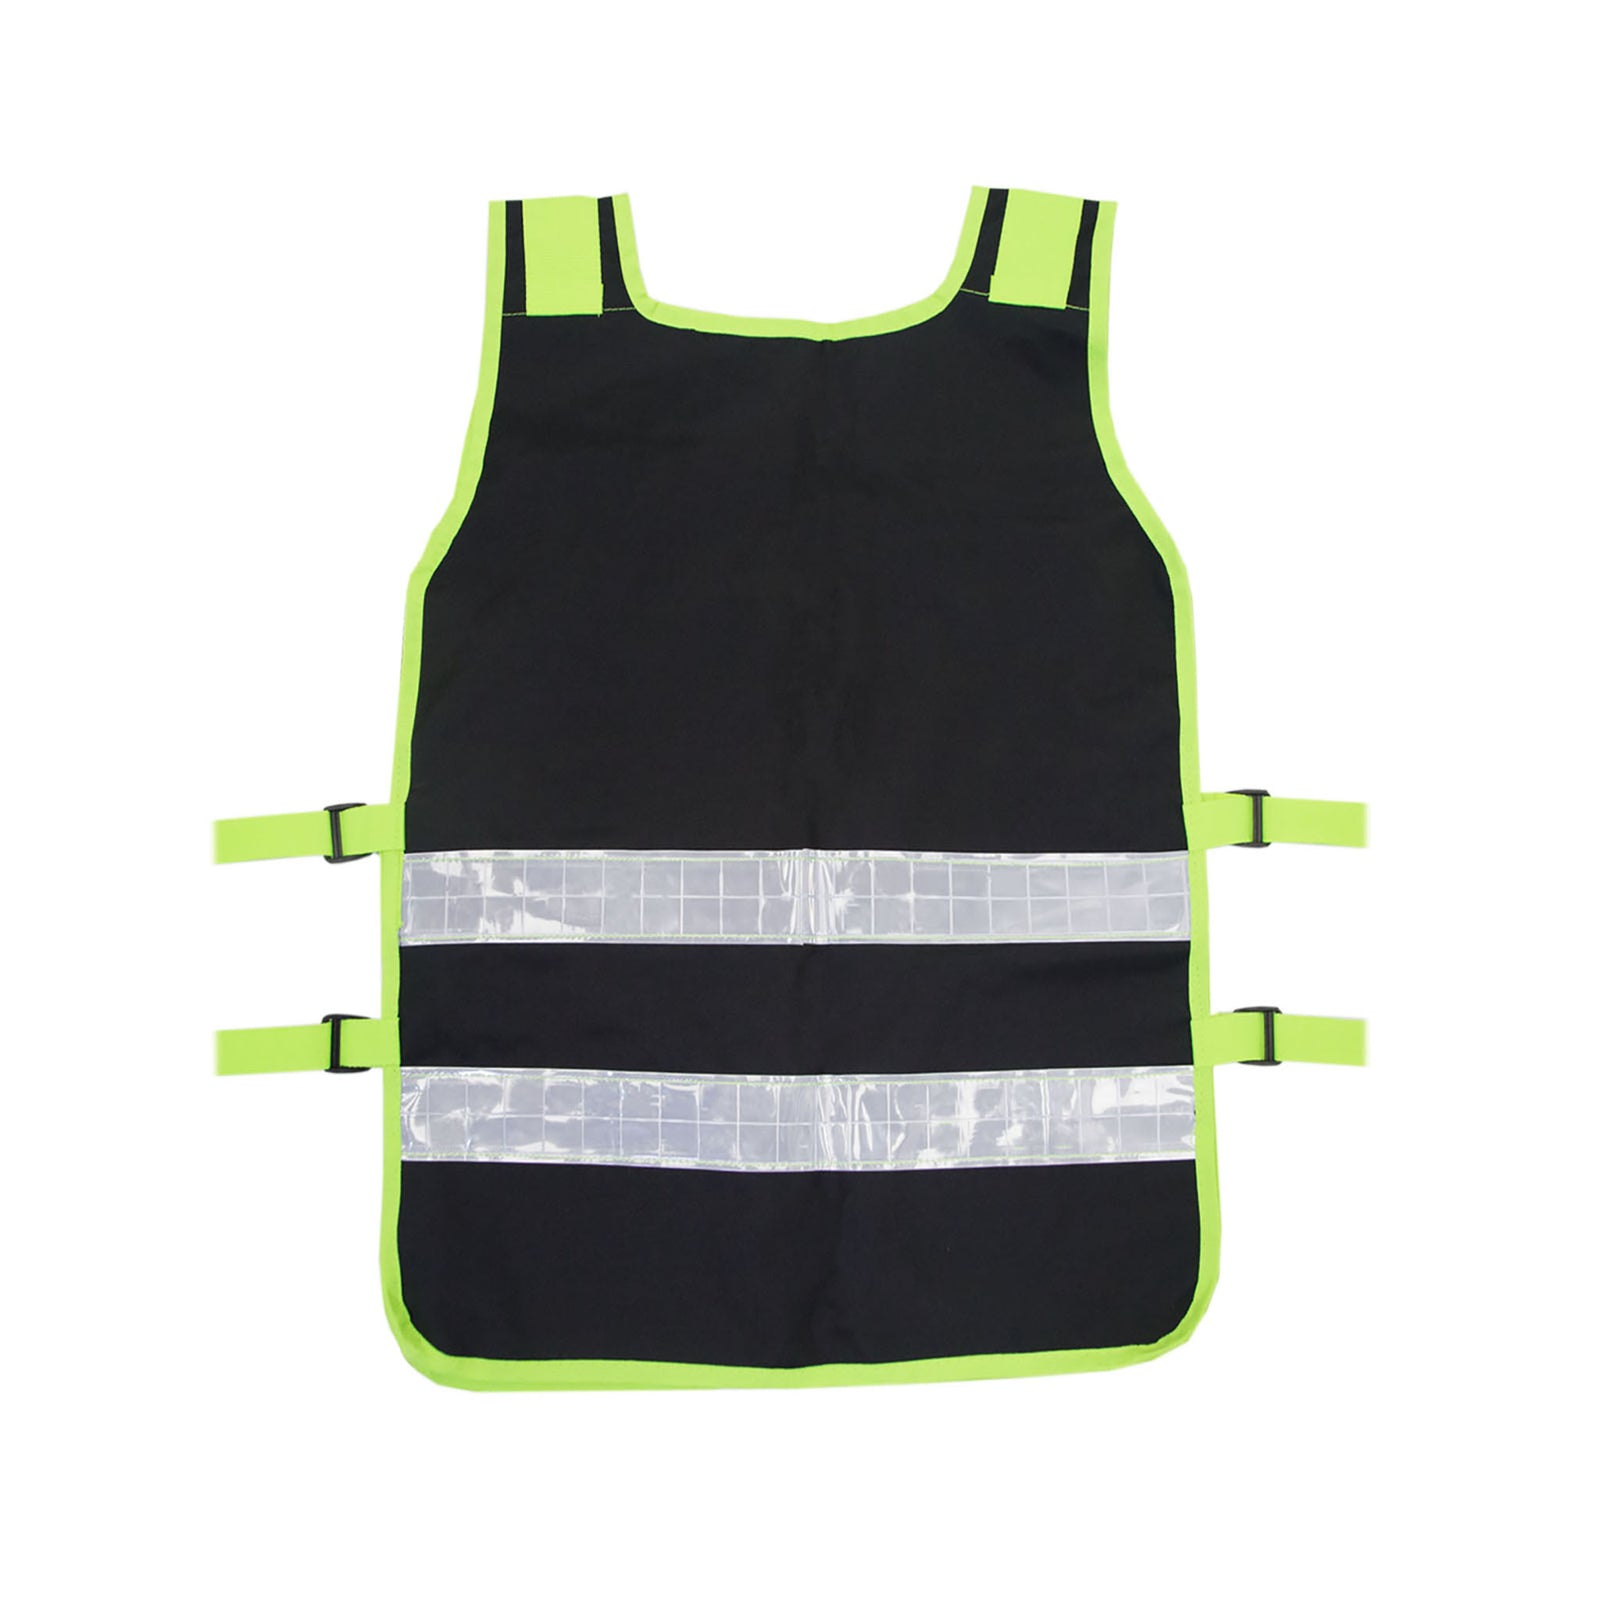 Back view of the black and lime high visibility size adjustable JORESTECH® tool vest with reflective strips on the back